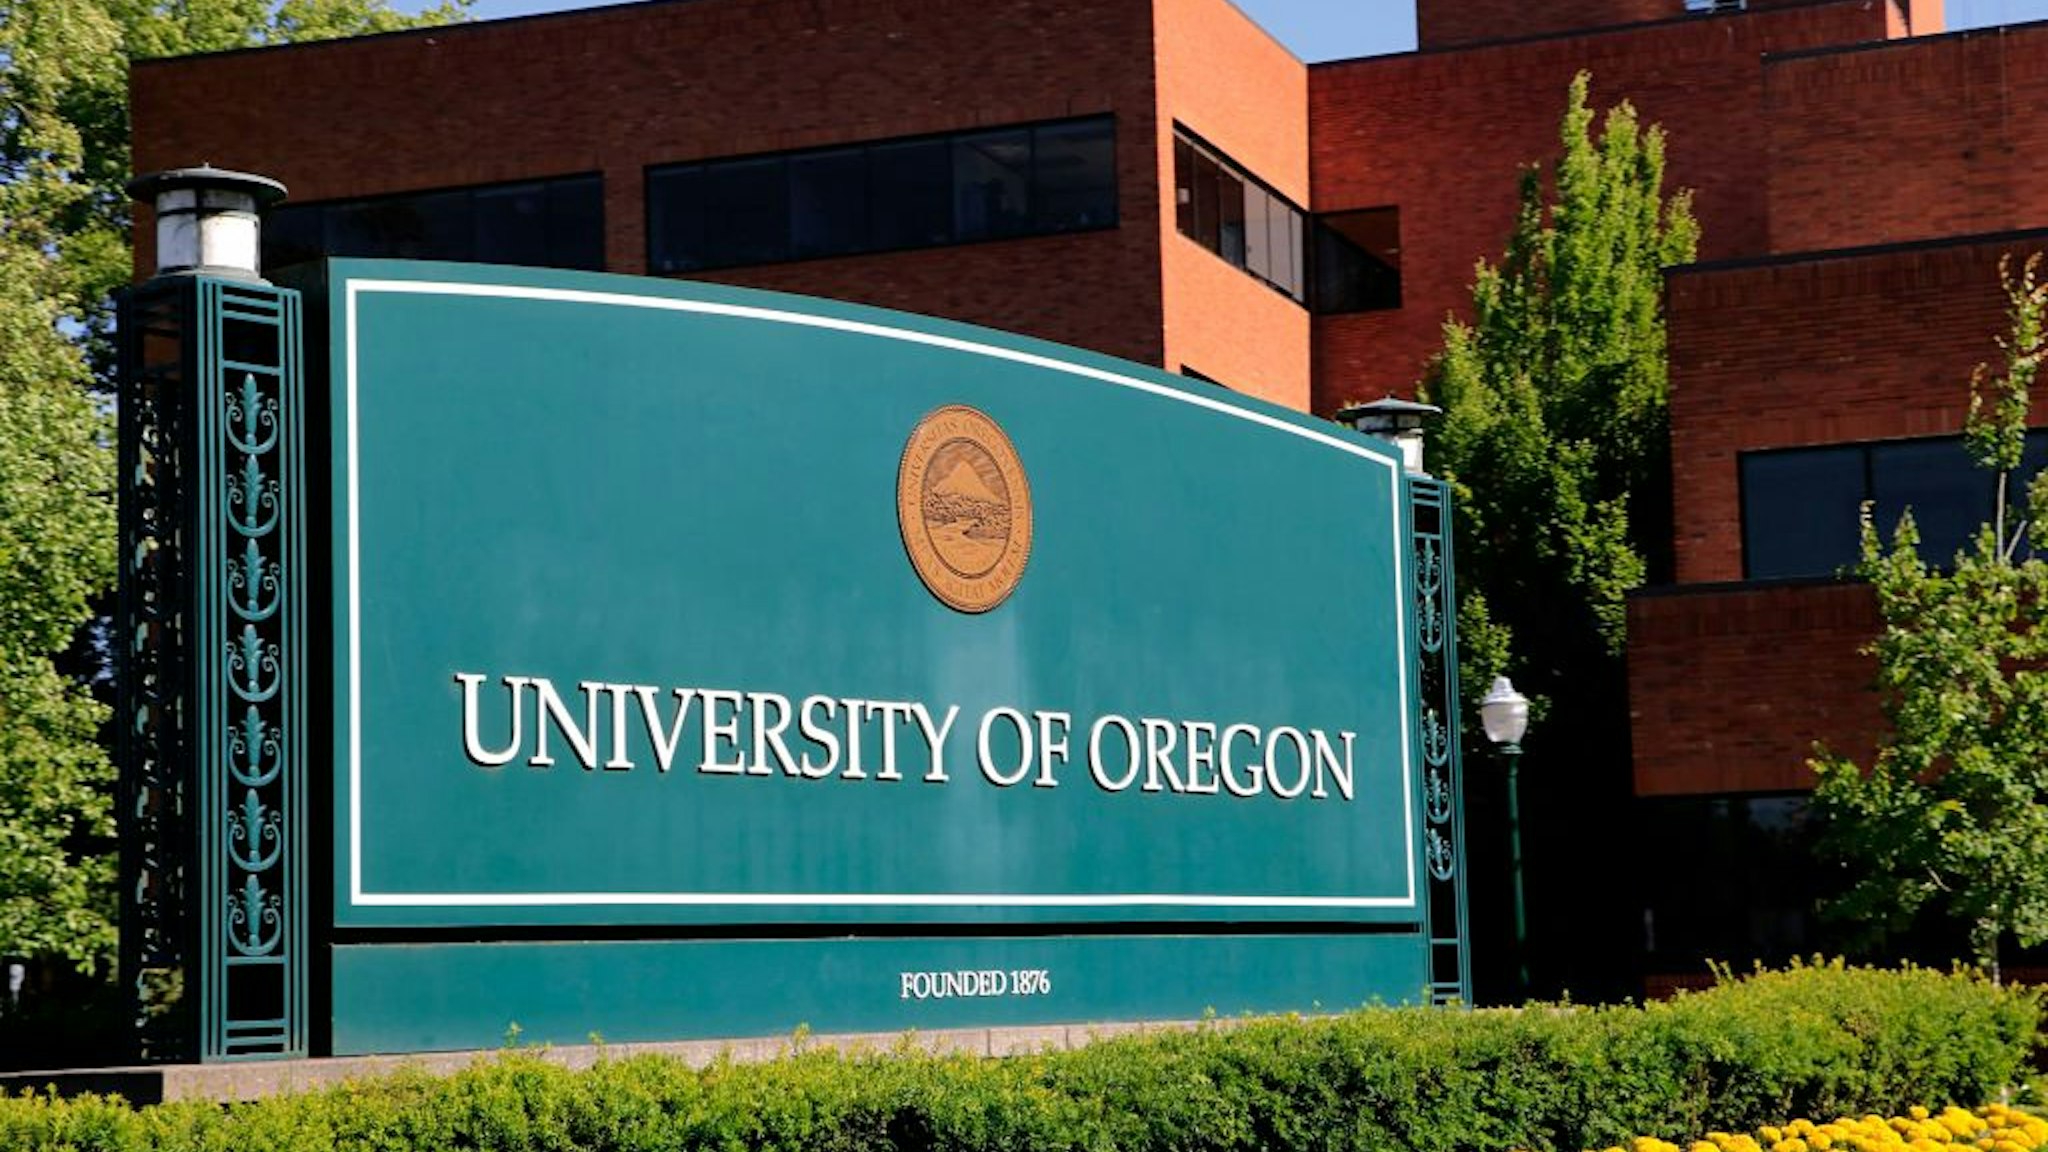 Main entry sign for the University of Oregon campus in Eugene.